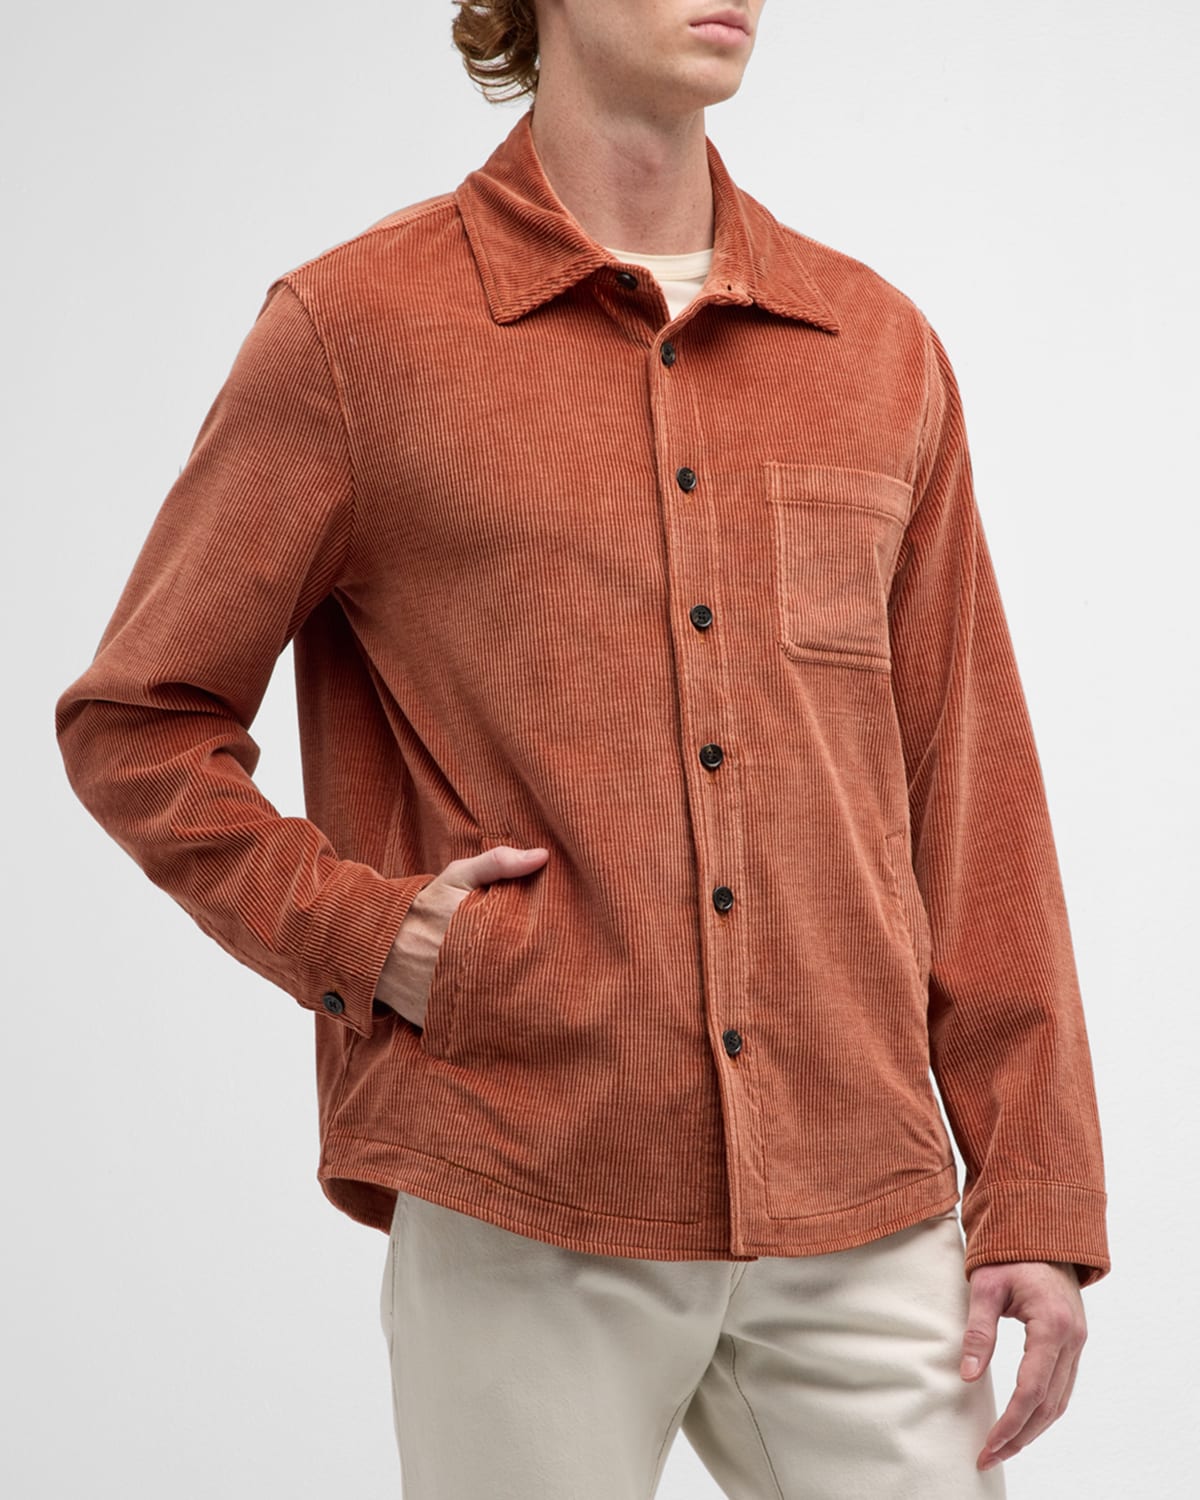 Men's Corduroy Overshirt with Pockets